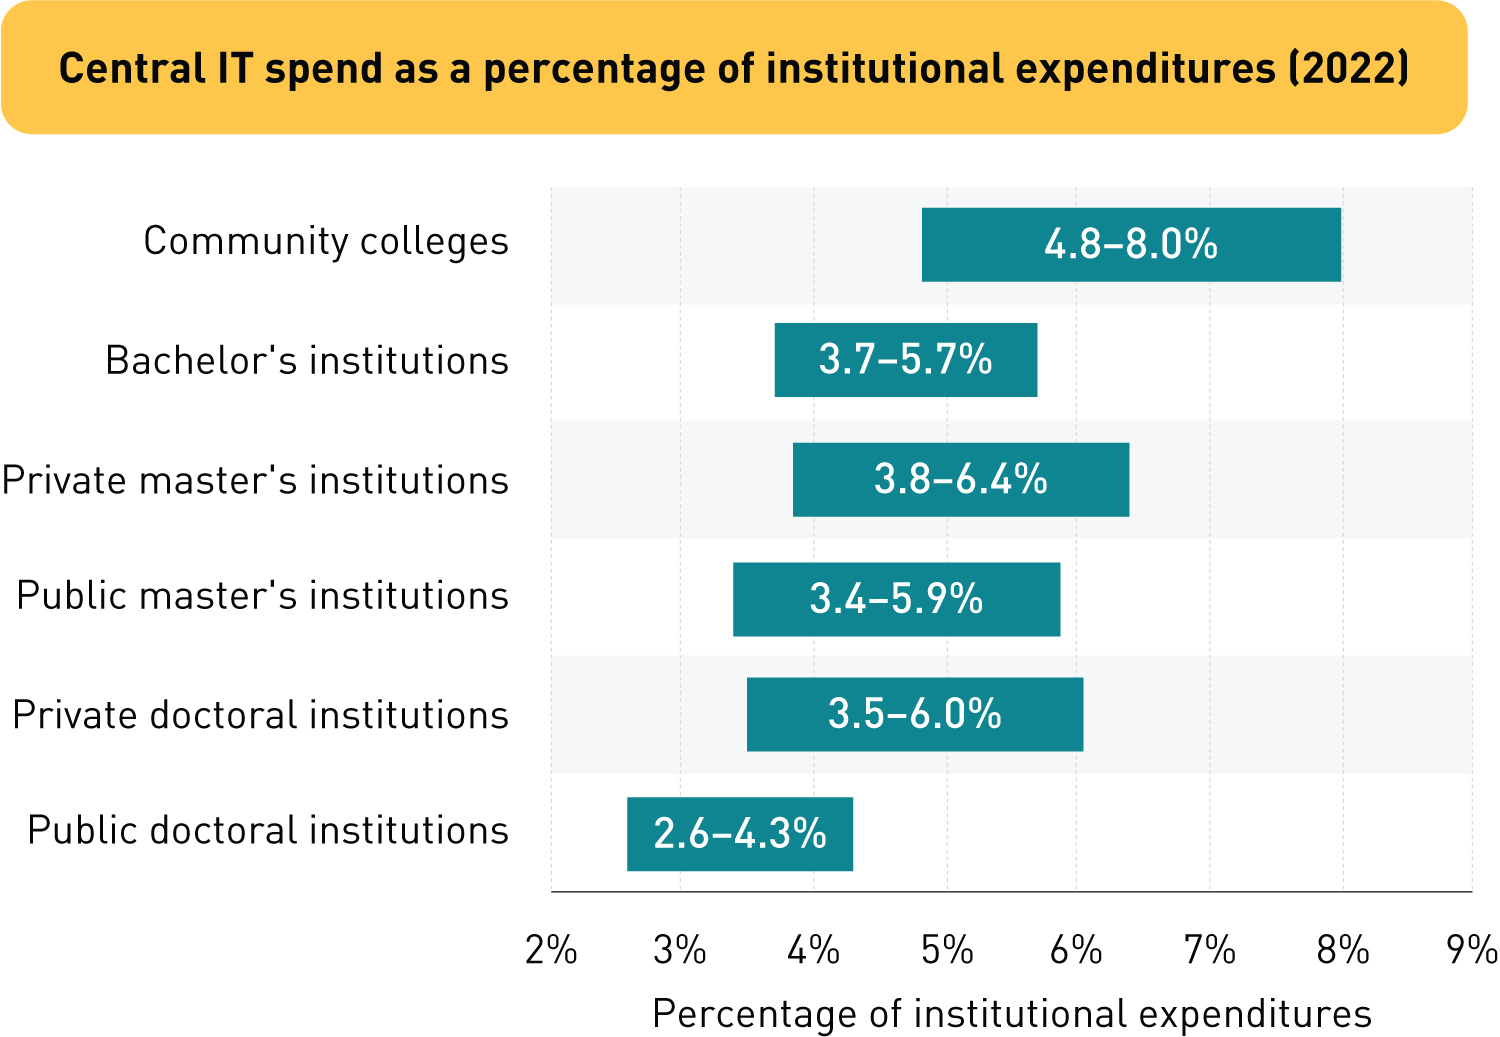 Central IT spend as a percentage of institutional expenditures (2022). Community colleges: 4.8-8.0% | Bachelor's institutions: 3.7-5.7% | Private master's institutions: 3.8-6.4% | Public masters institutions: 3.4-5.9% | Private doctoral institutions: 3.5-6.0% | Public doctoral institutions: 2.6-4.3%.